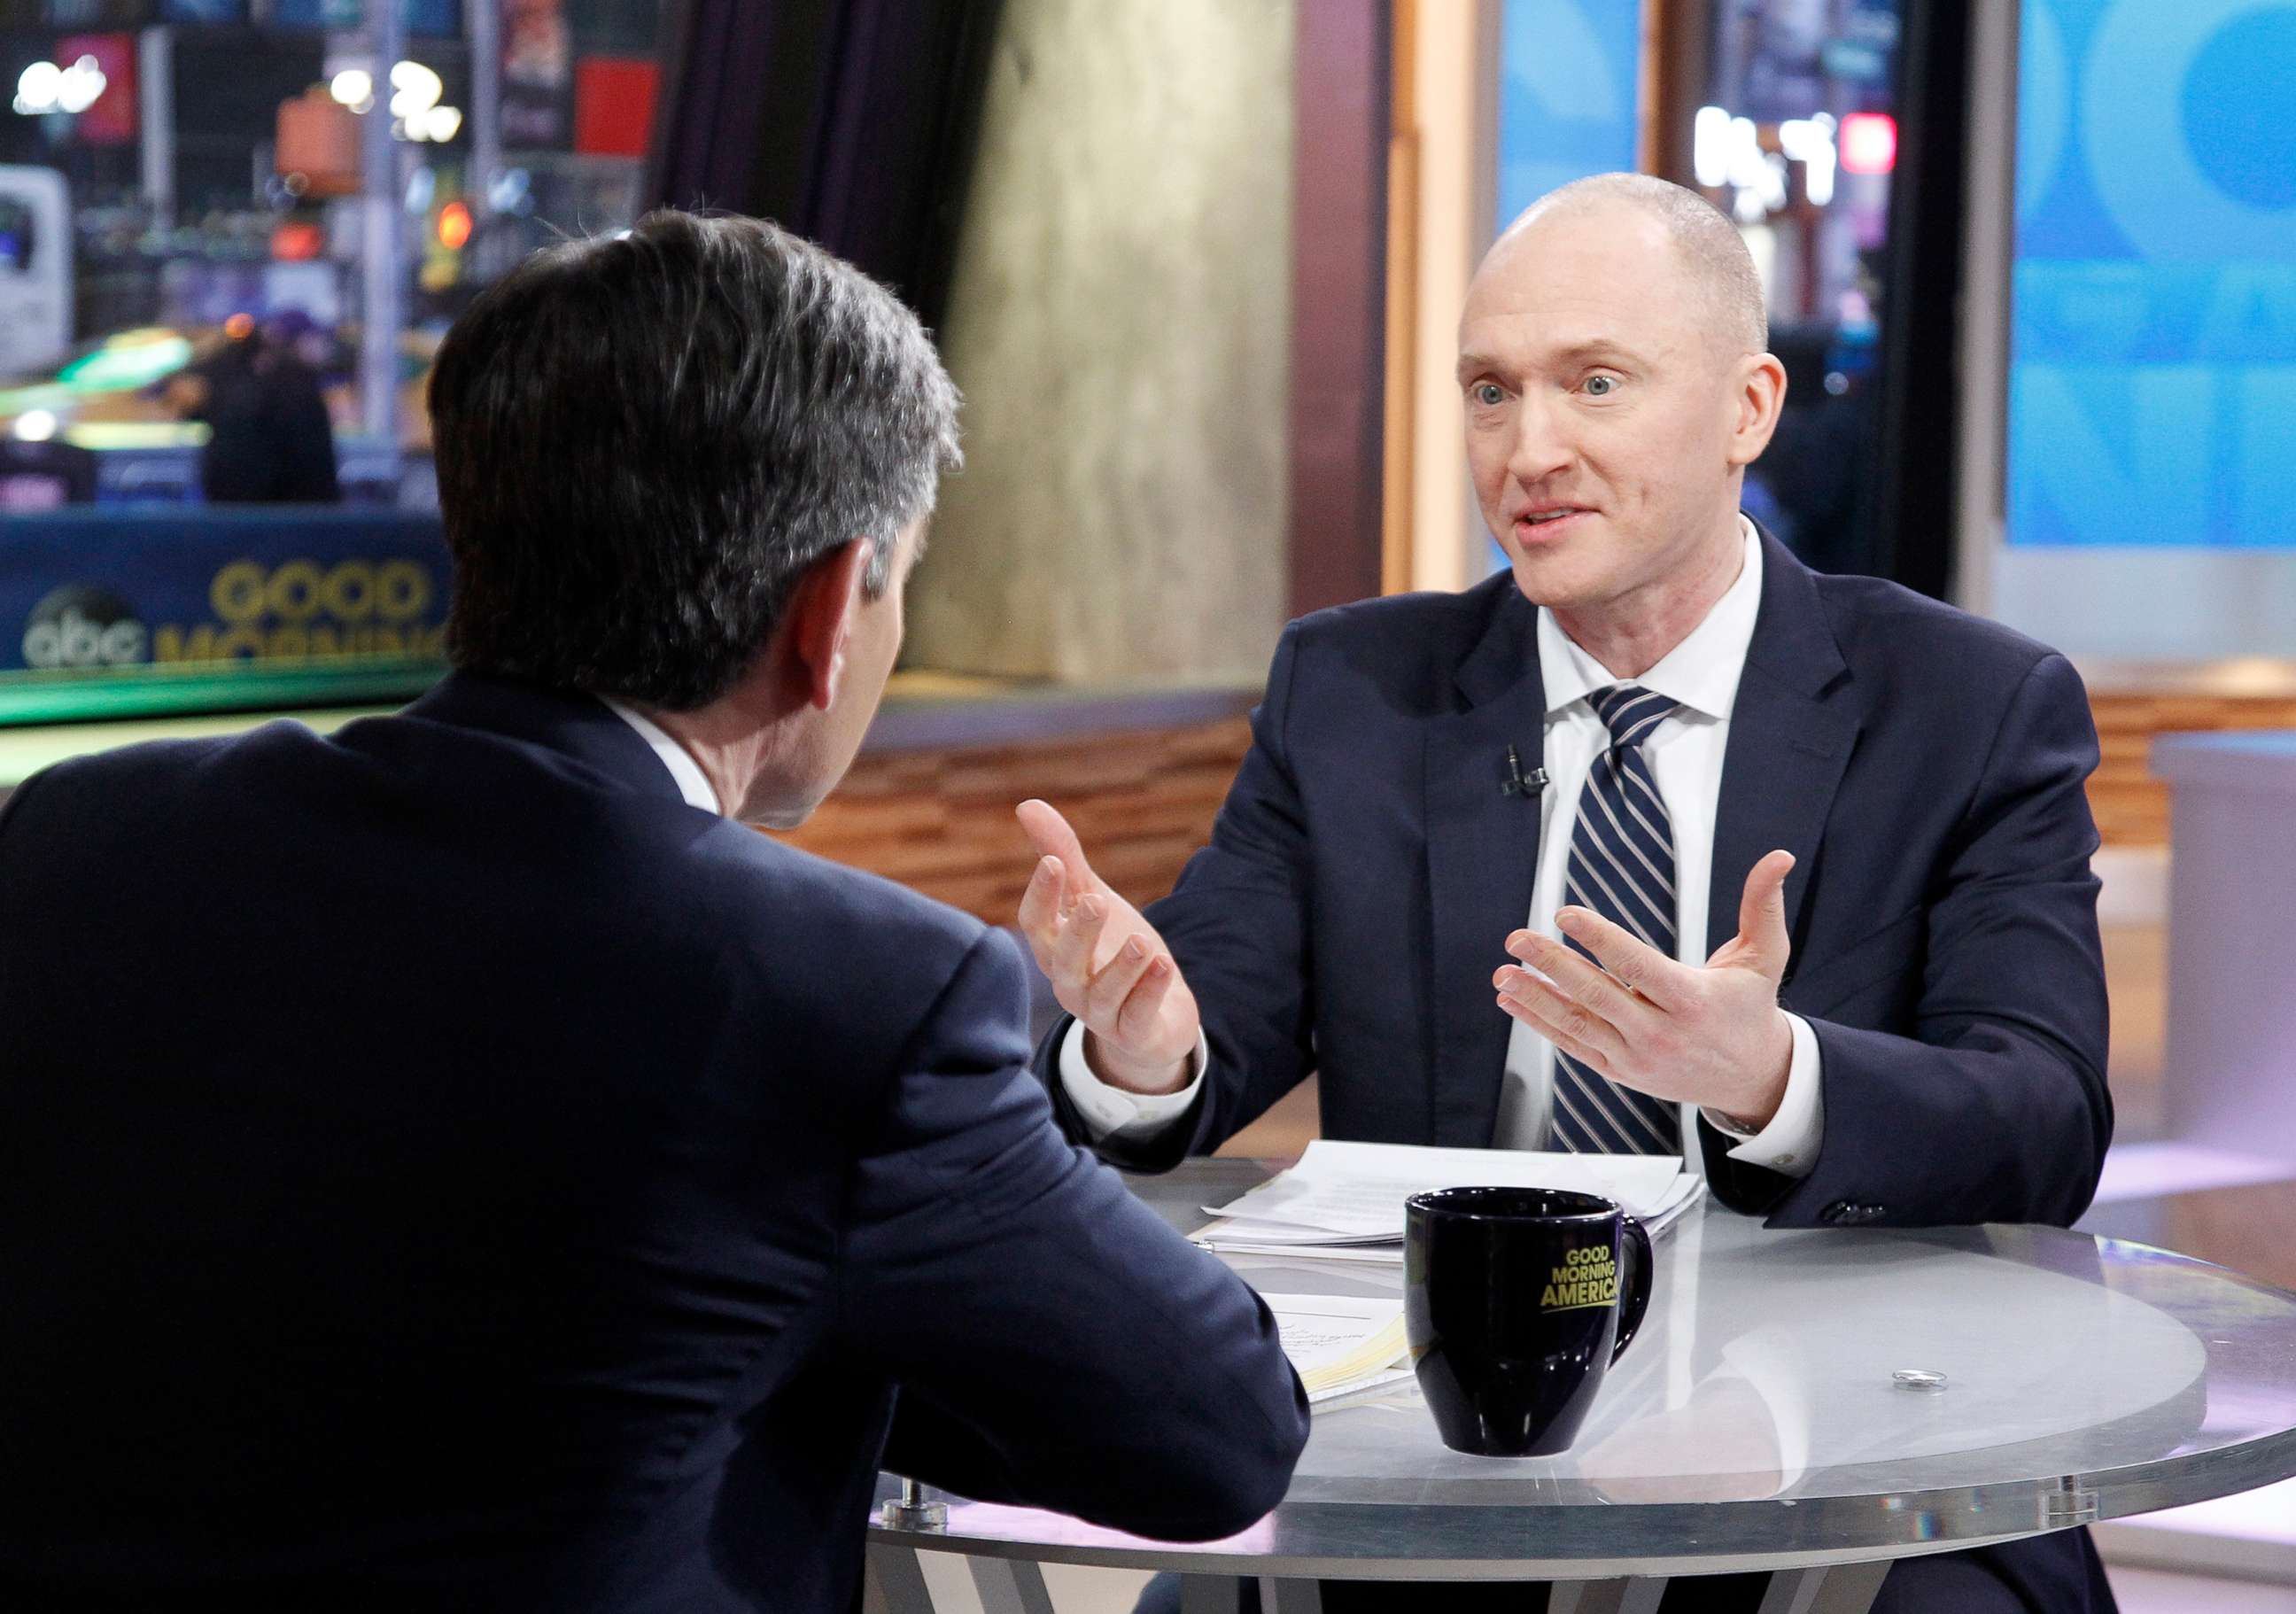 PHOTO: Carter Page, former foreign-policy adviser to Donald Trump's 2016 Presidential campaign, is interviewed by George Stephanopoulos, Feb. 6, 2018.